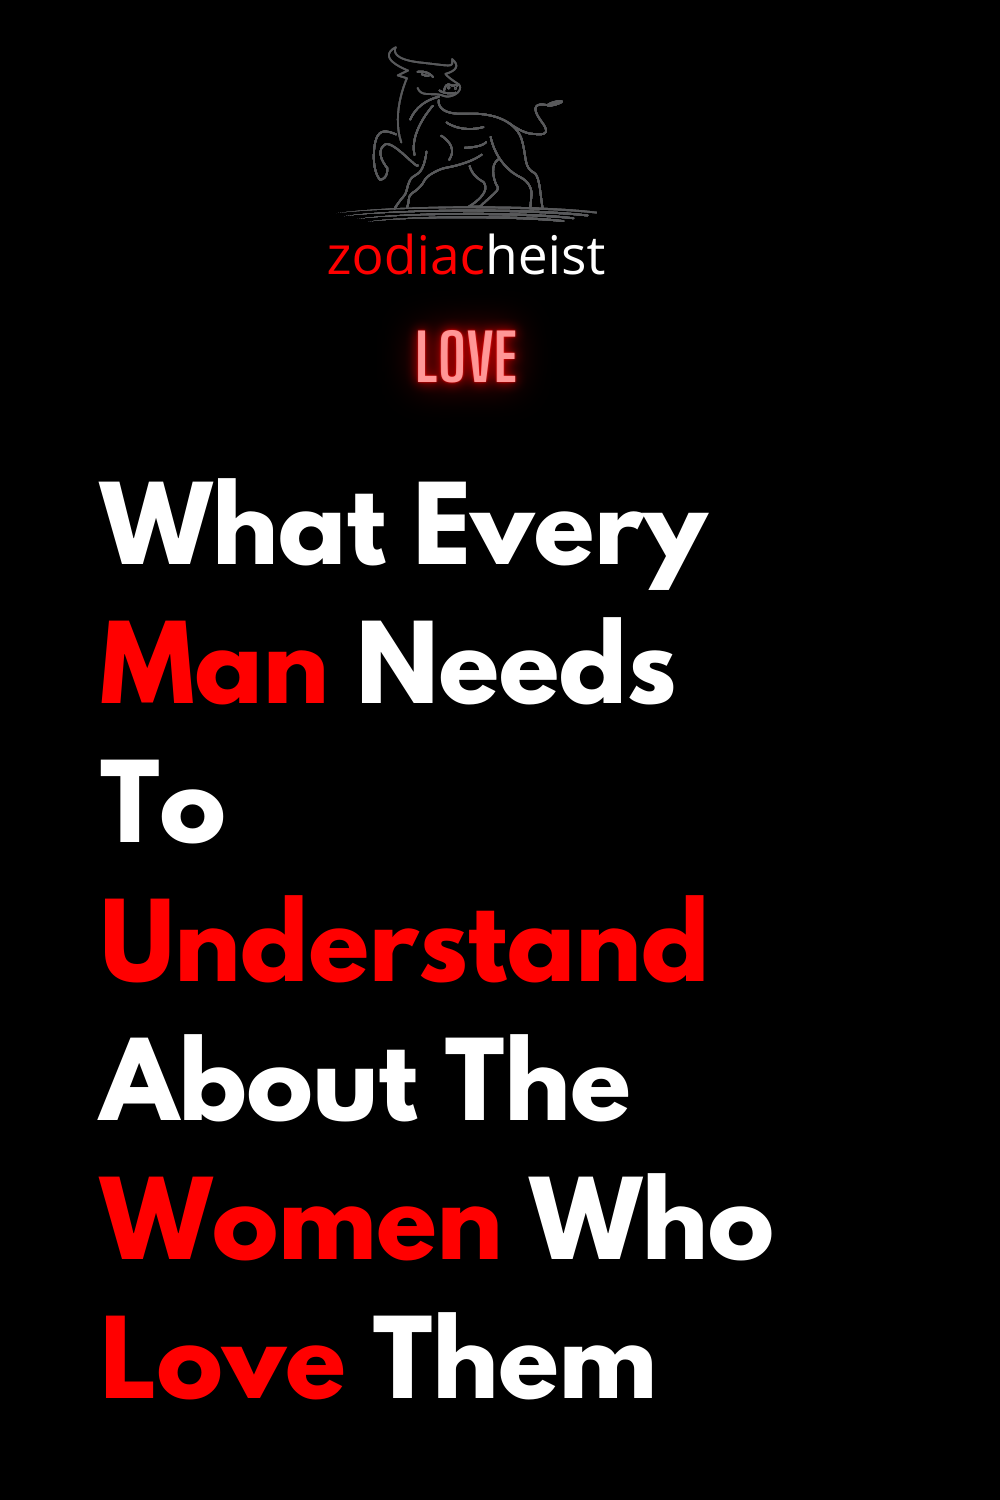 What Every Man Needs To Understand About The Women Who Love Them